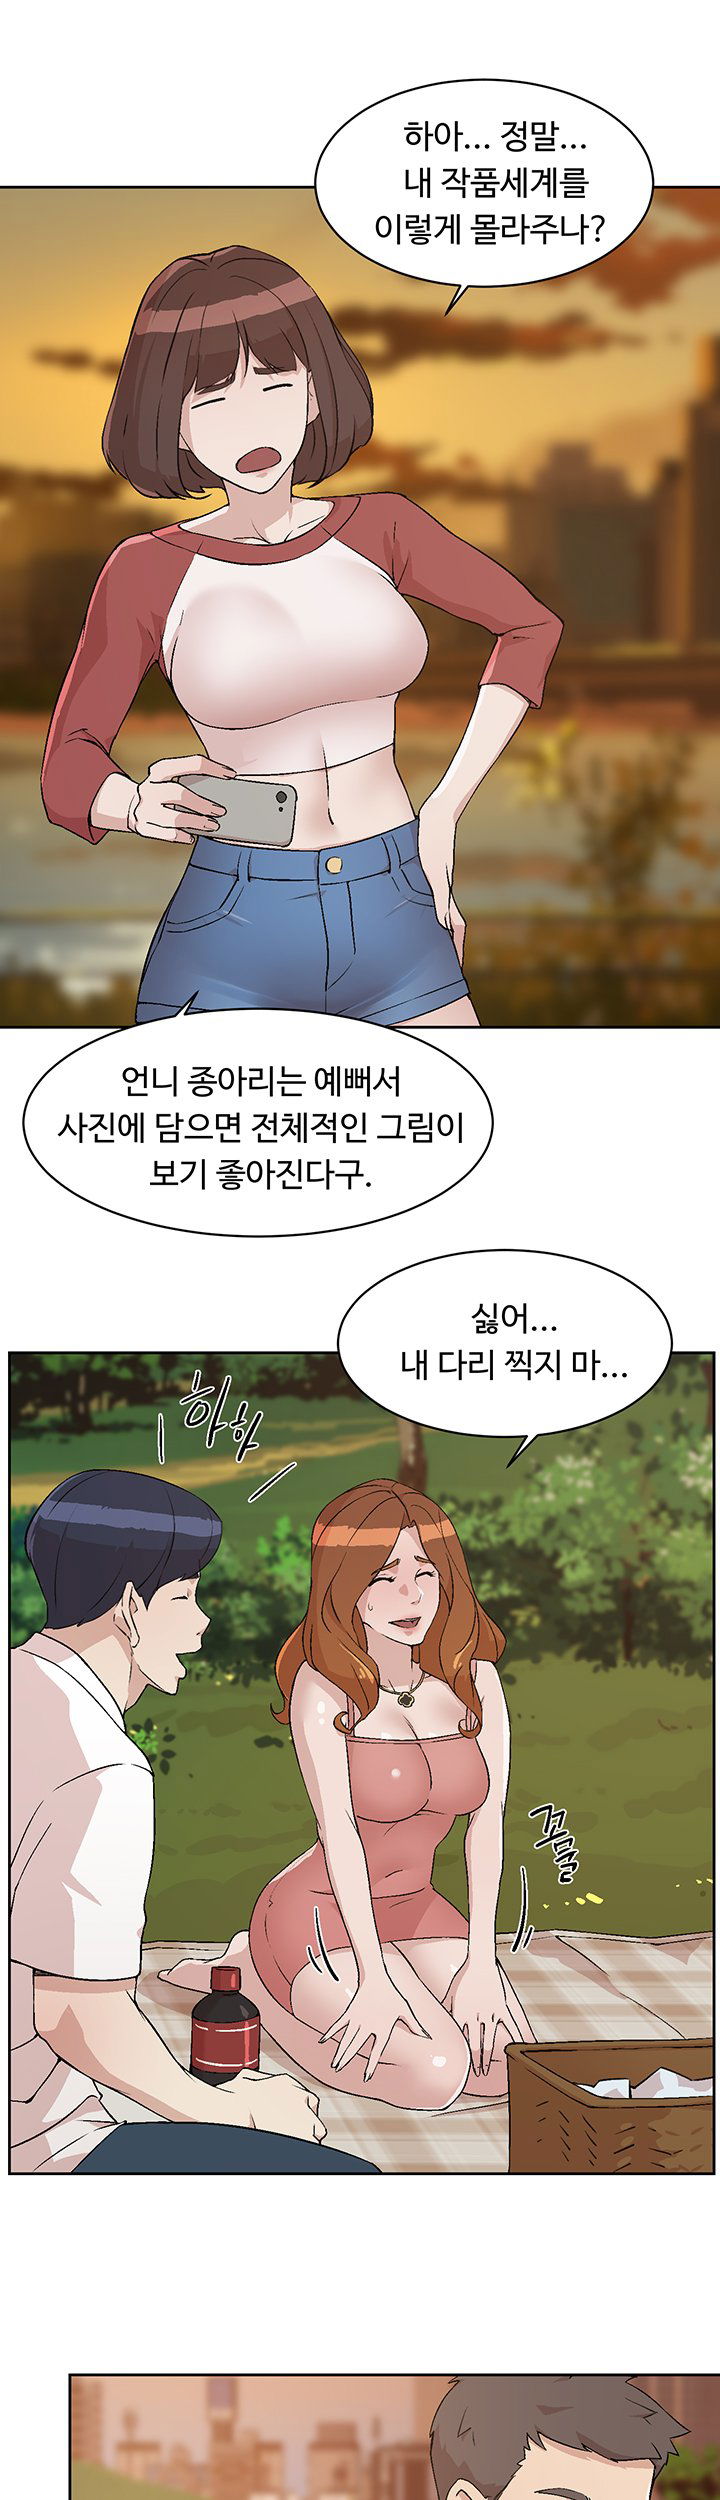 everything-about-best-friend-raw-chap-3-6